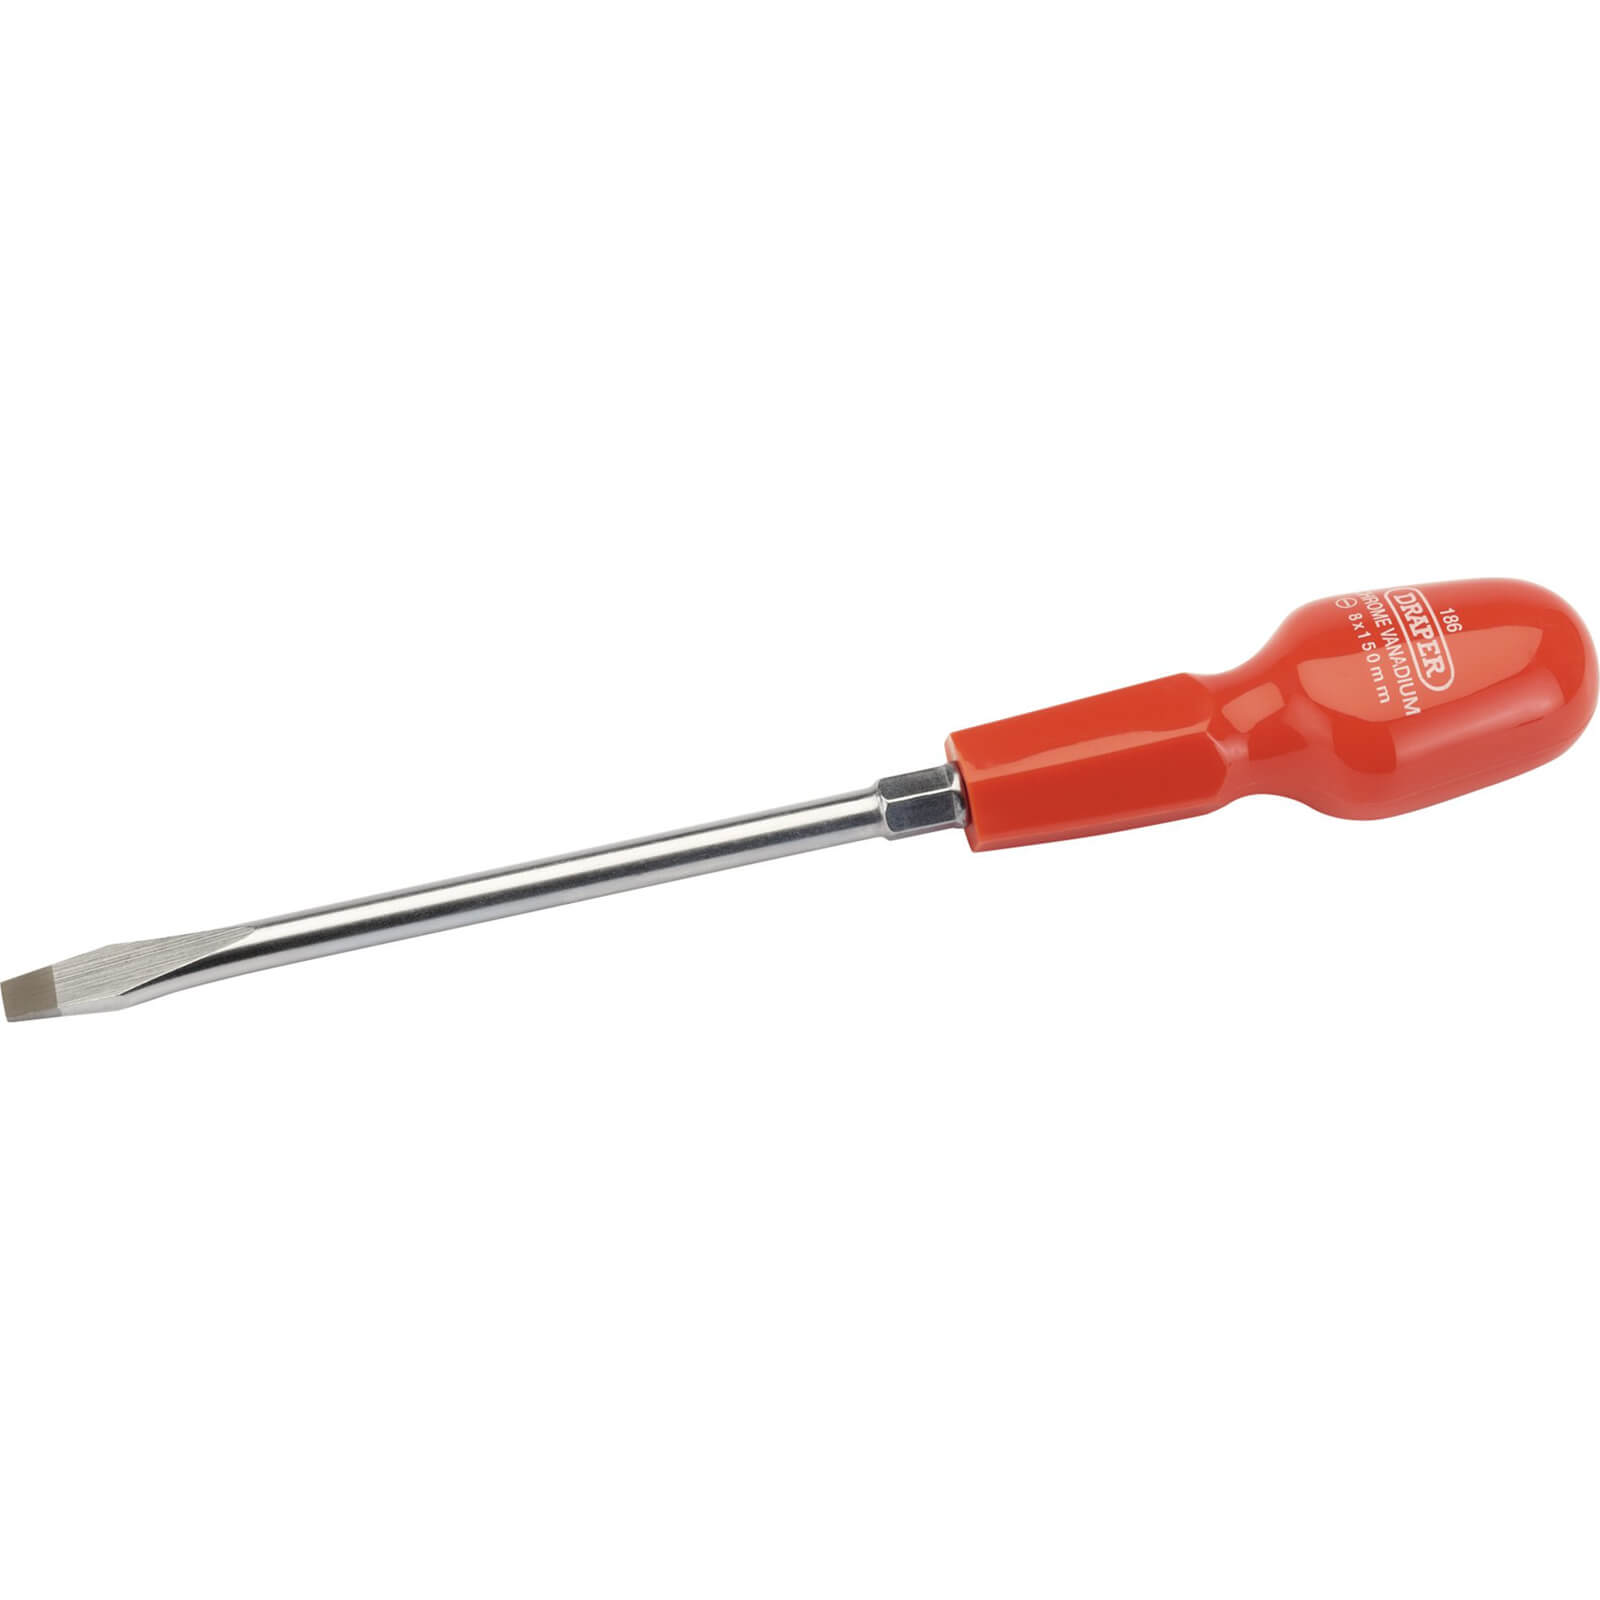 Photo of Draper Flared Slotted Screwdriver 8mm 150mm